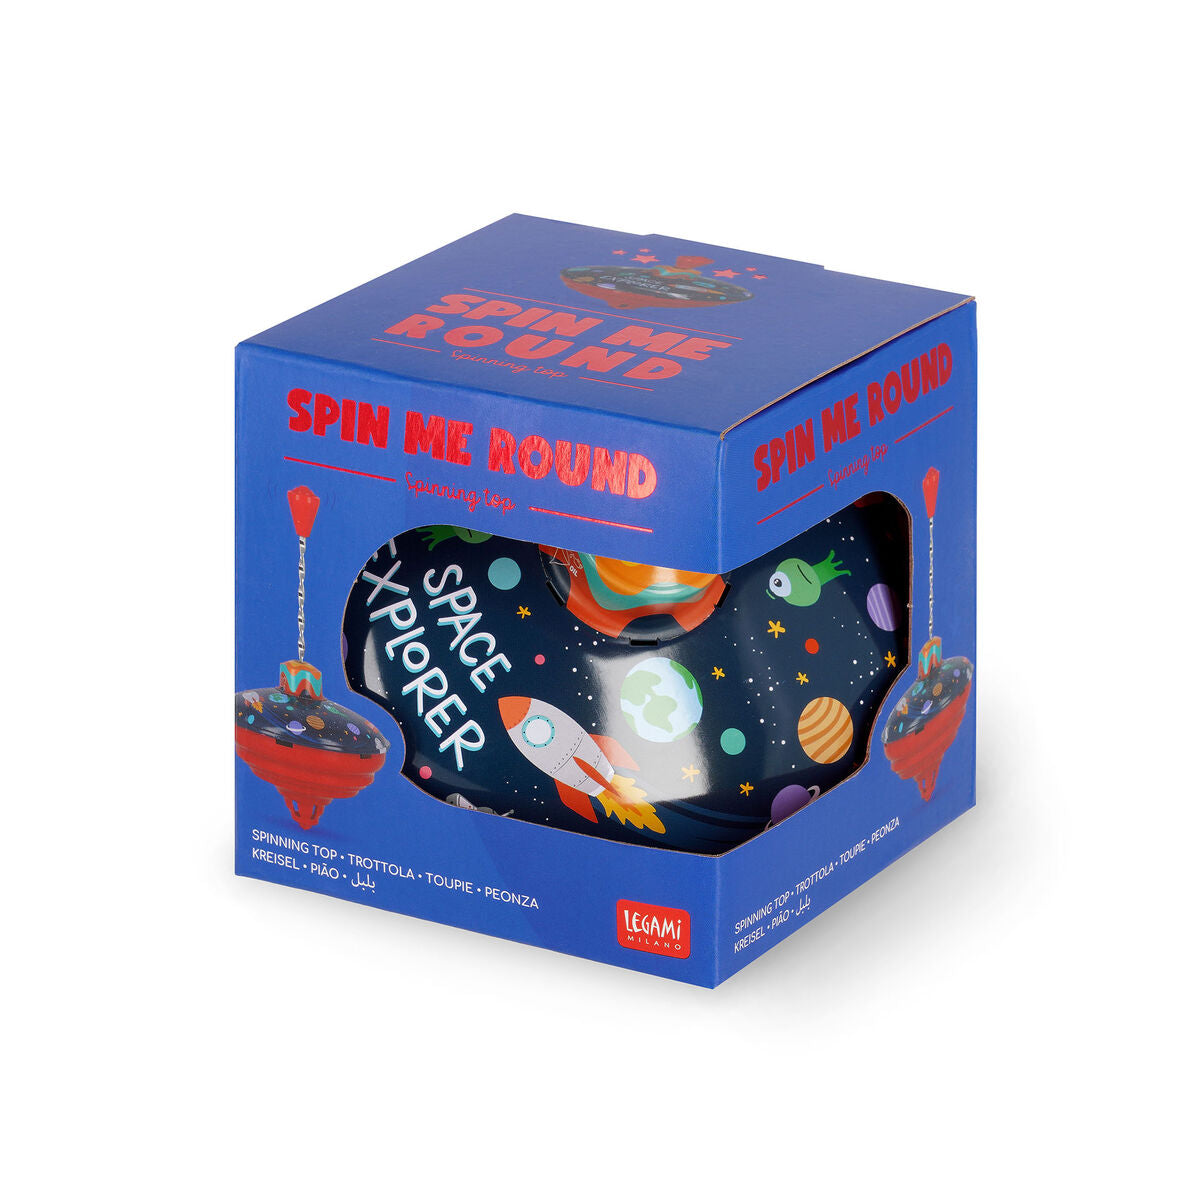 Quirky Gifts | Legami Vintage Games Spinning Top Space by Weirs of Baggot Street